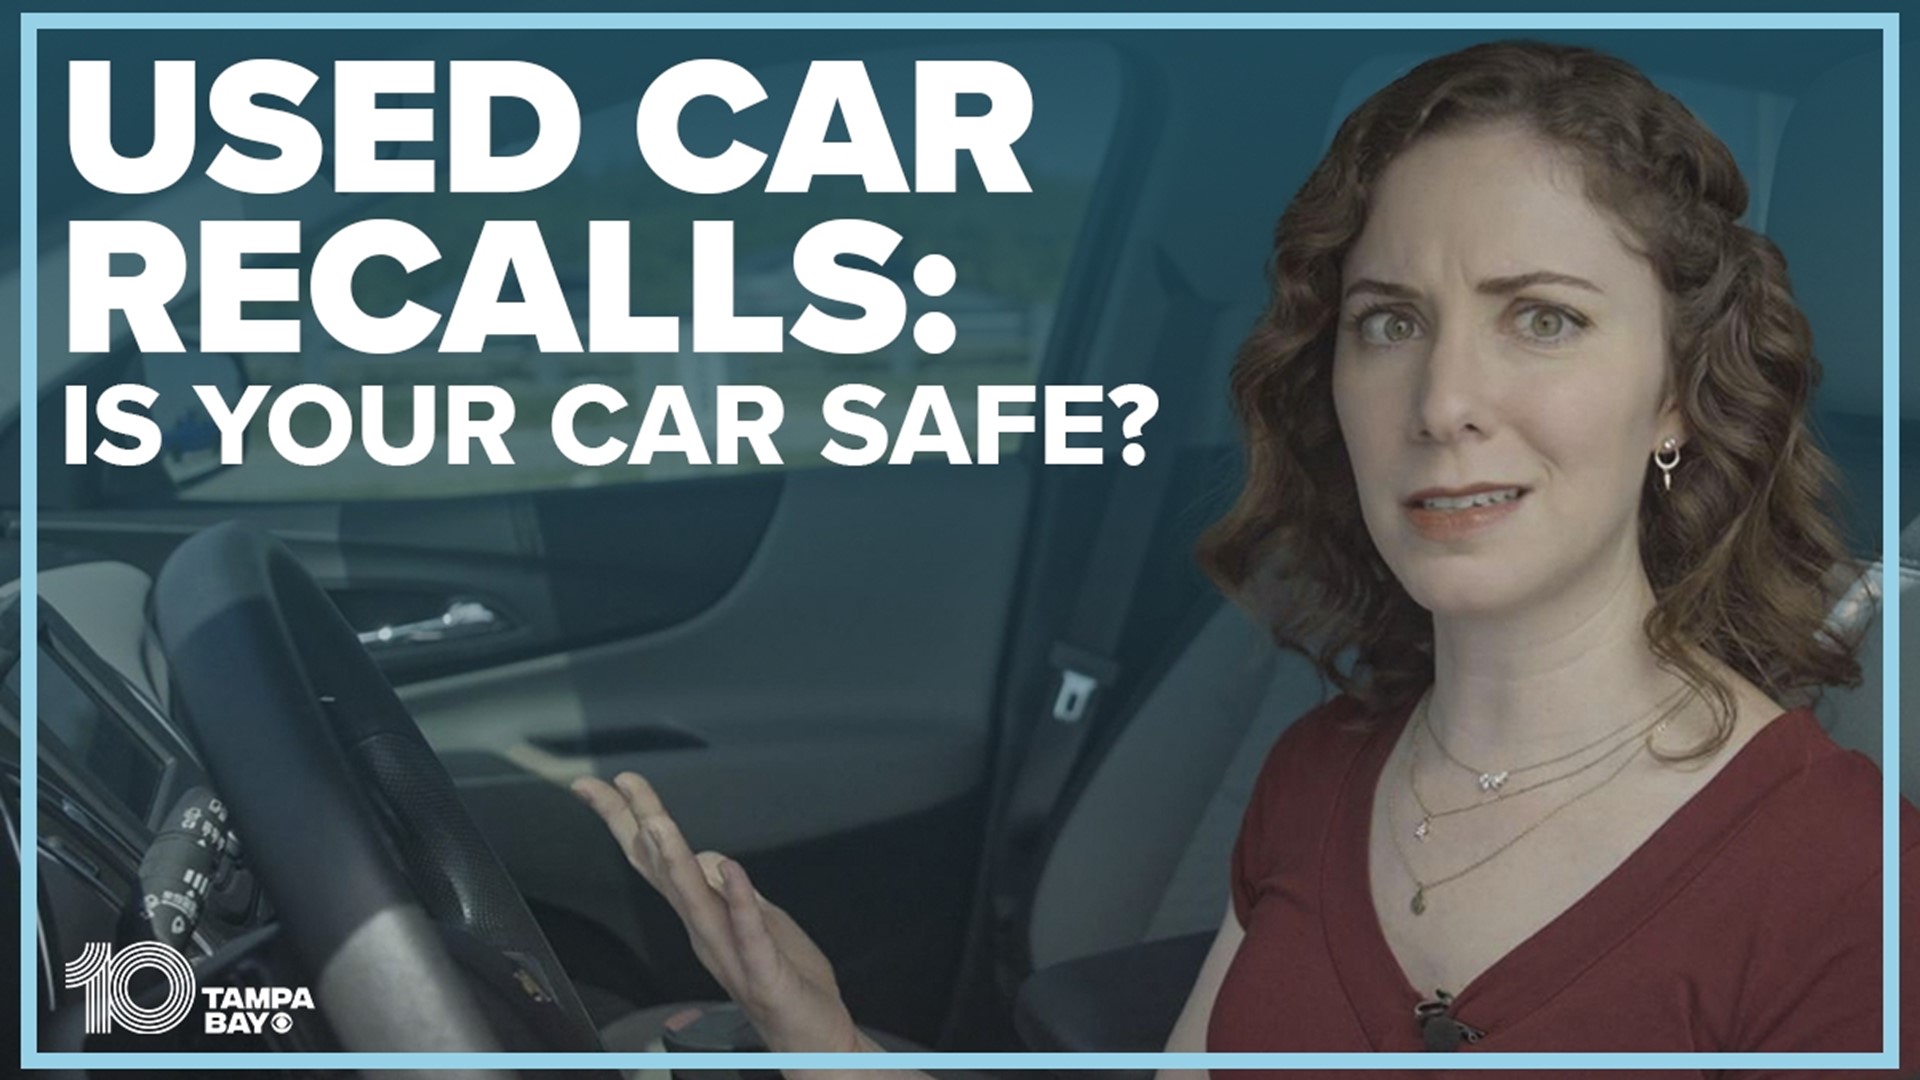 While it’s illegal for dealerships to sell new cars with open safety recalls, they can legally sell used cars with open safety recalls.